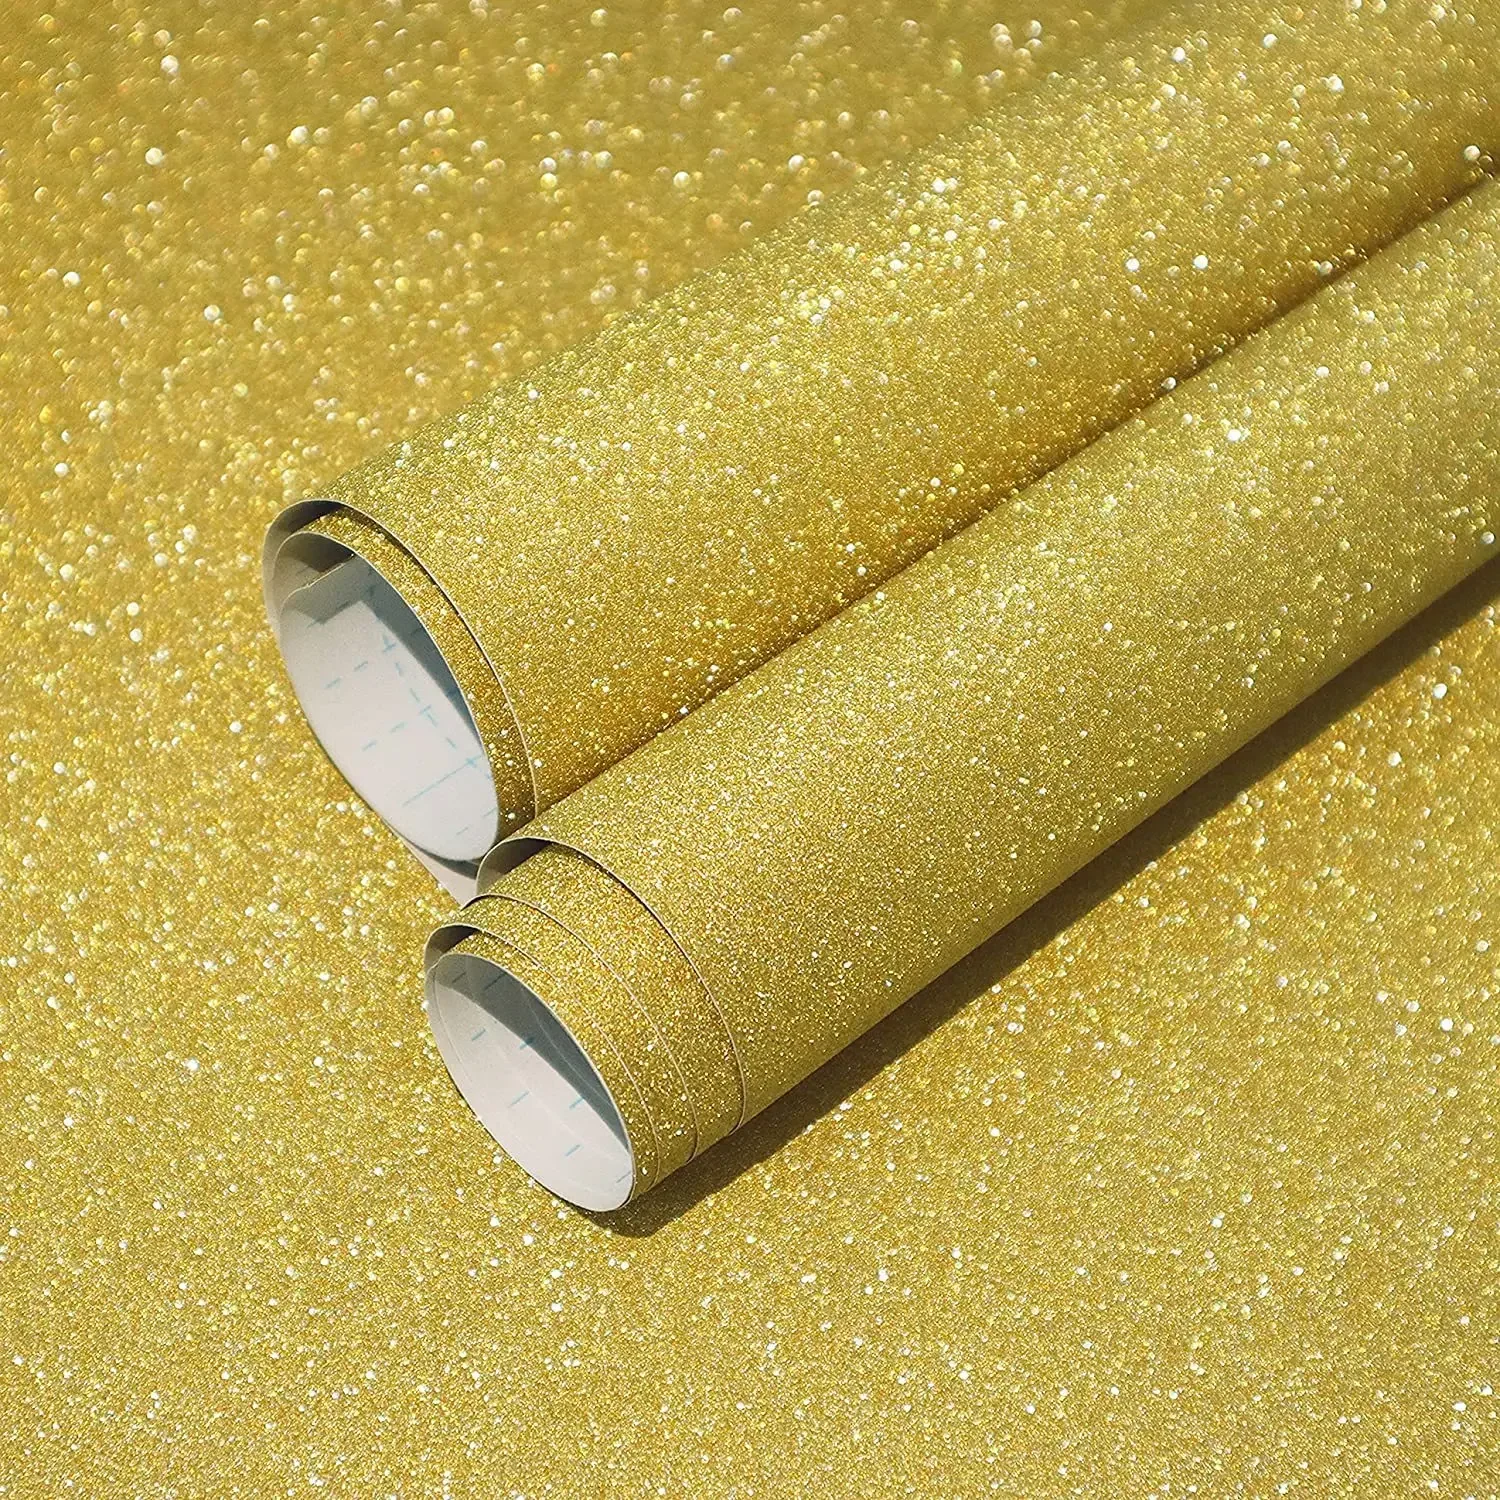 Multifunction Glitter Contact Paper Peel and Stick Silver Gold Wallpaper Vinyl Film Self Adhesive Wall Paper. 12 sheets multifunction sun and moon index sticker office calendars paper notepad stickers